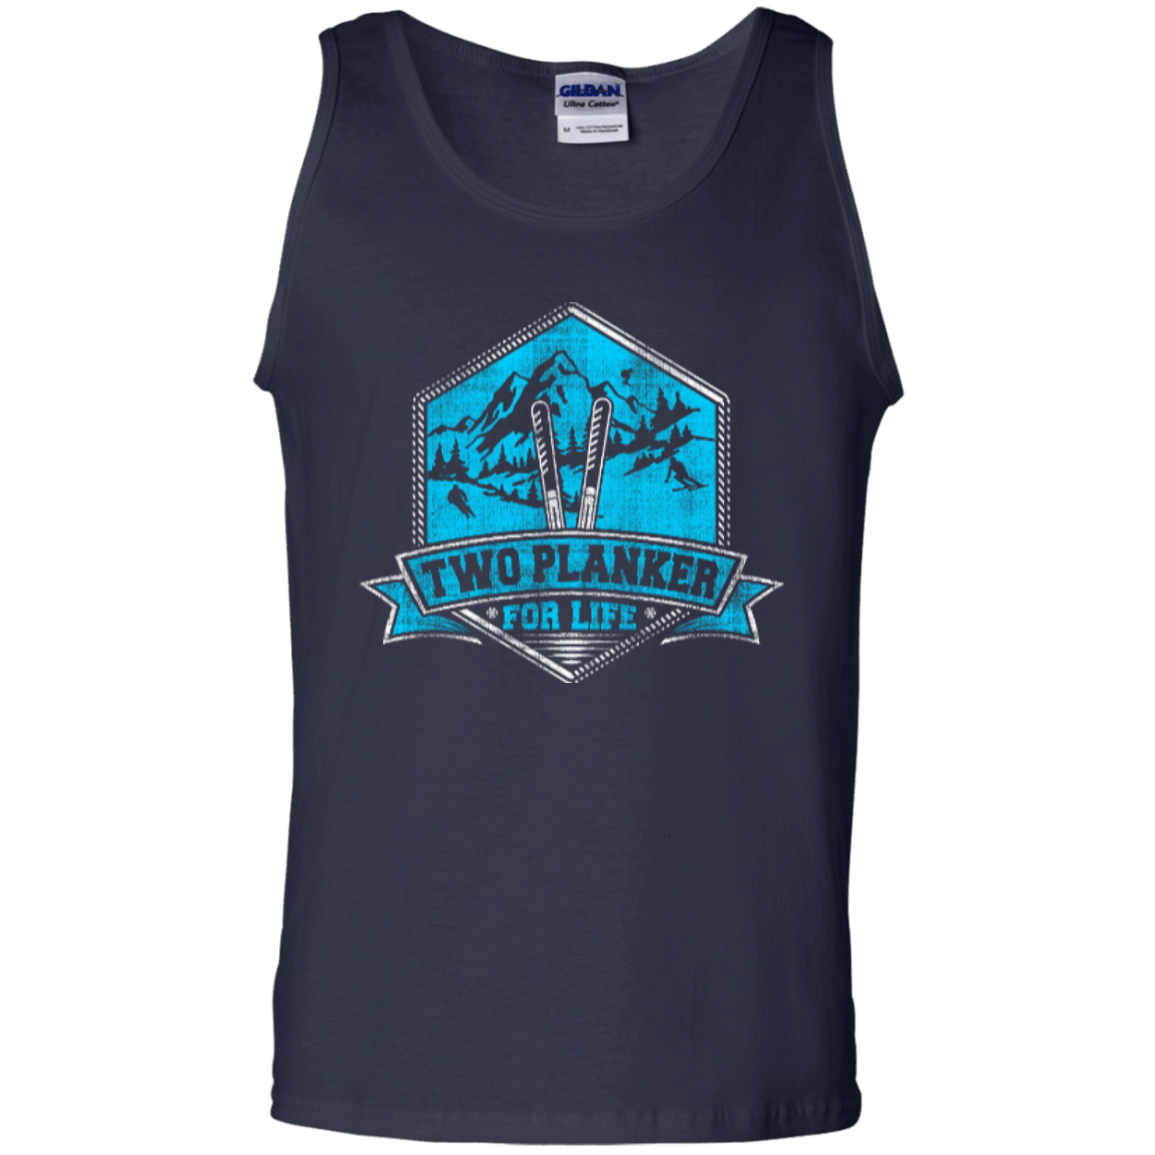 Two Plankers For Life Tank Tops - Powderaddicts